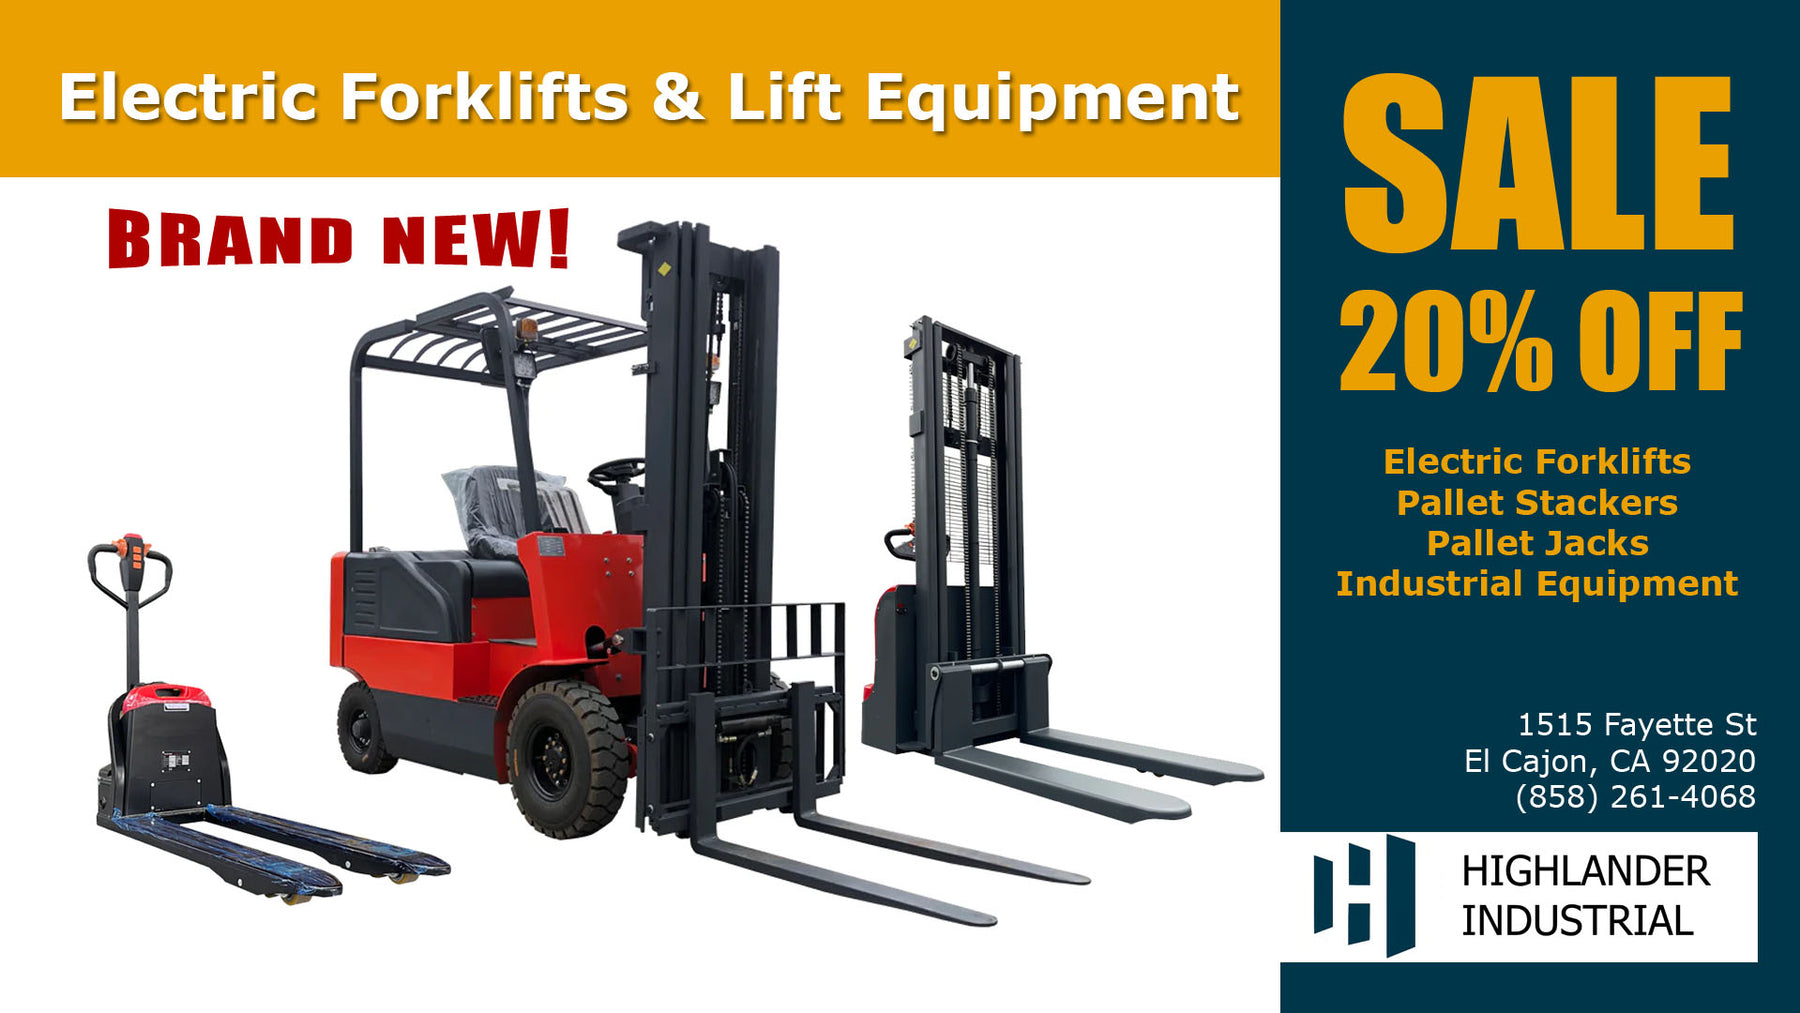 San Diego Electric Forklift SALE! Industrial Lift Equipment